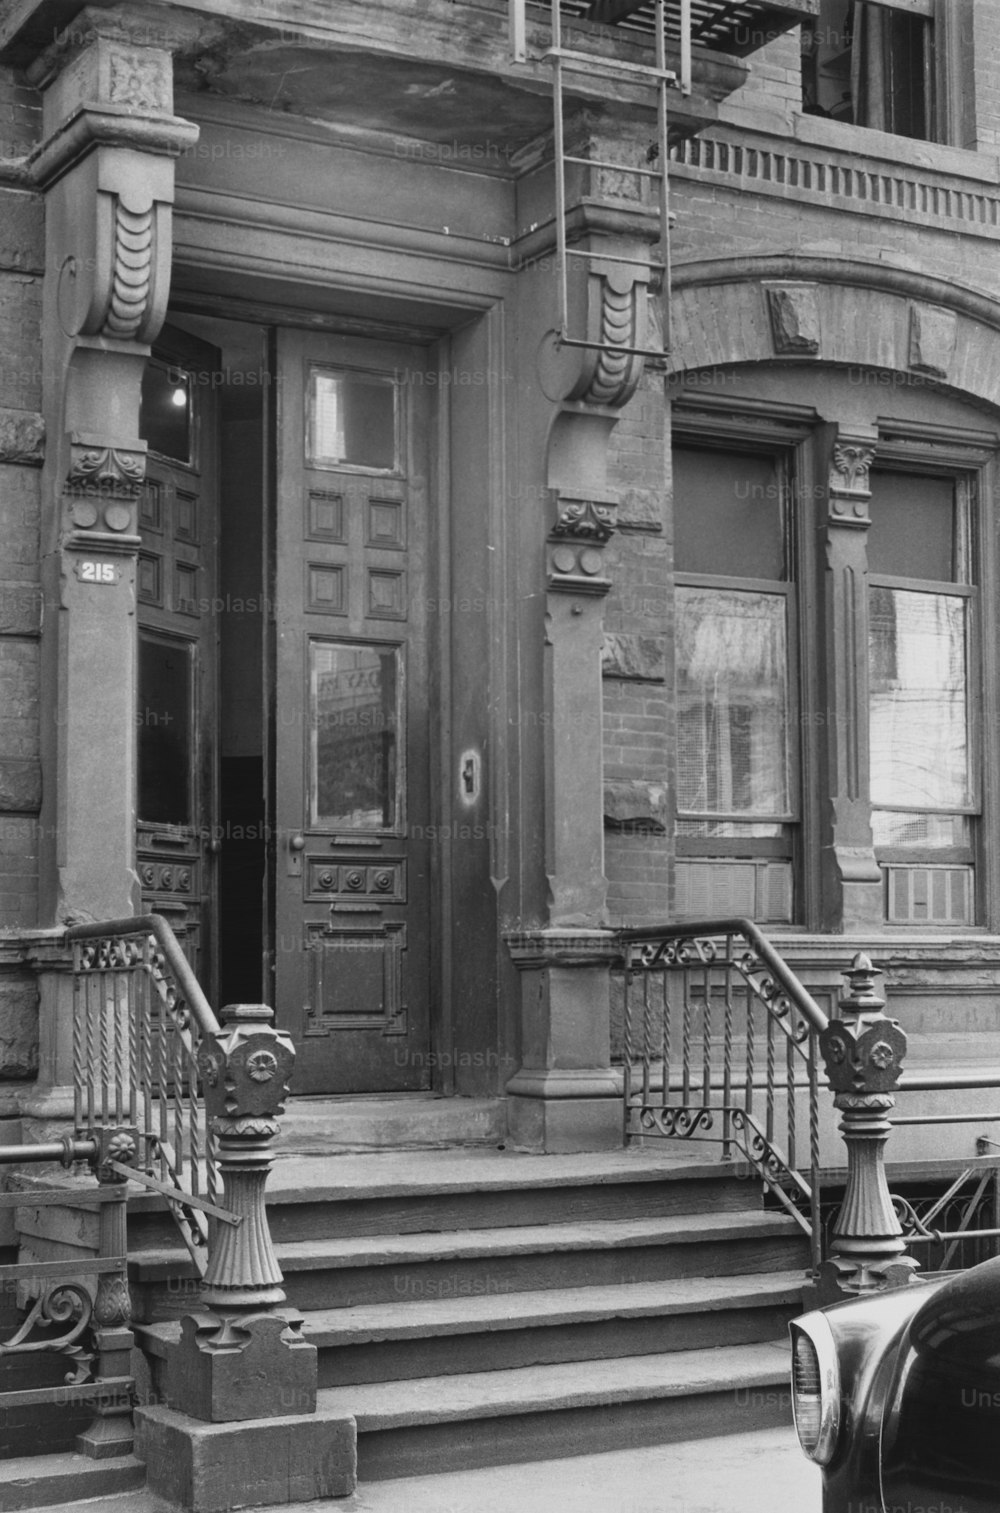 View of Door Entrance to Building on Unspecified Street. (Photo by George Marks/Retrofile/Getty Images)